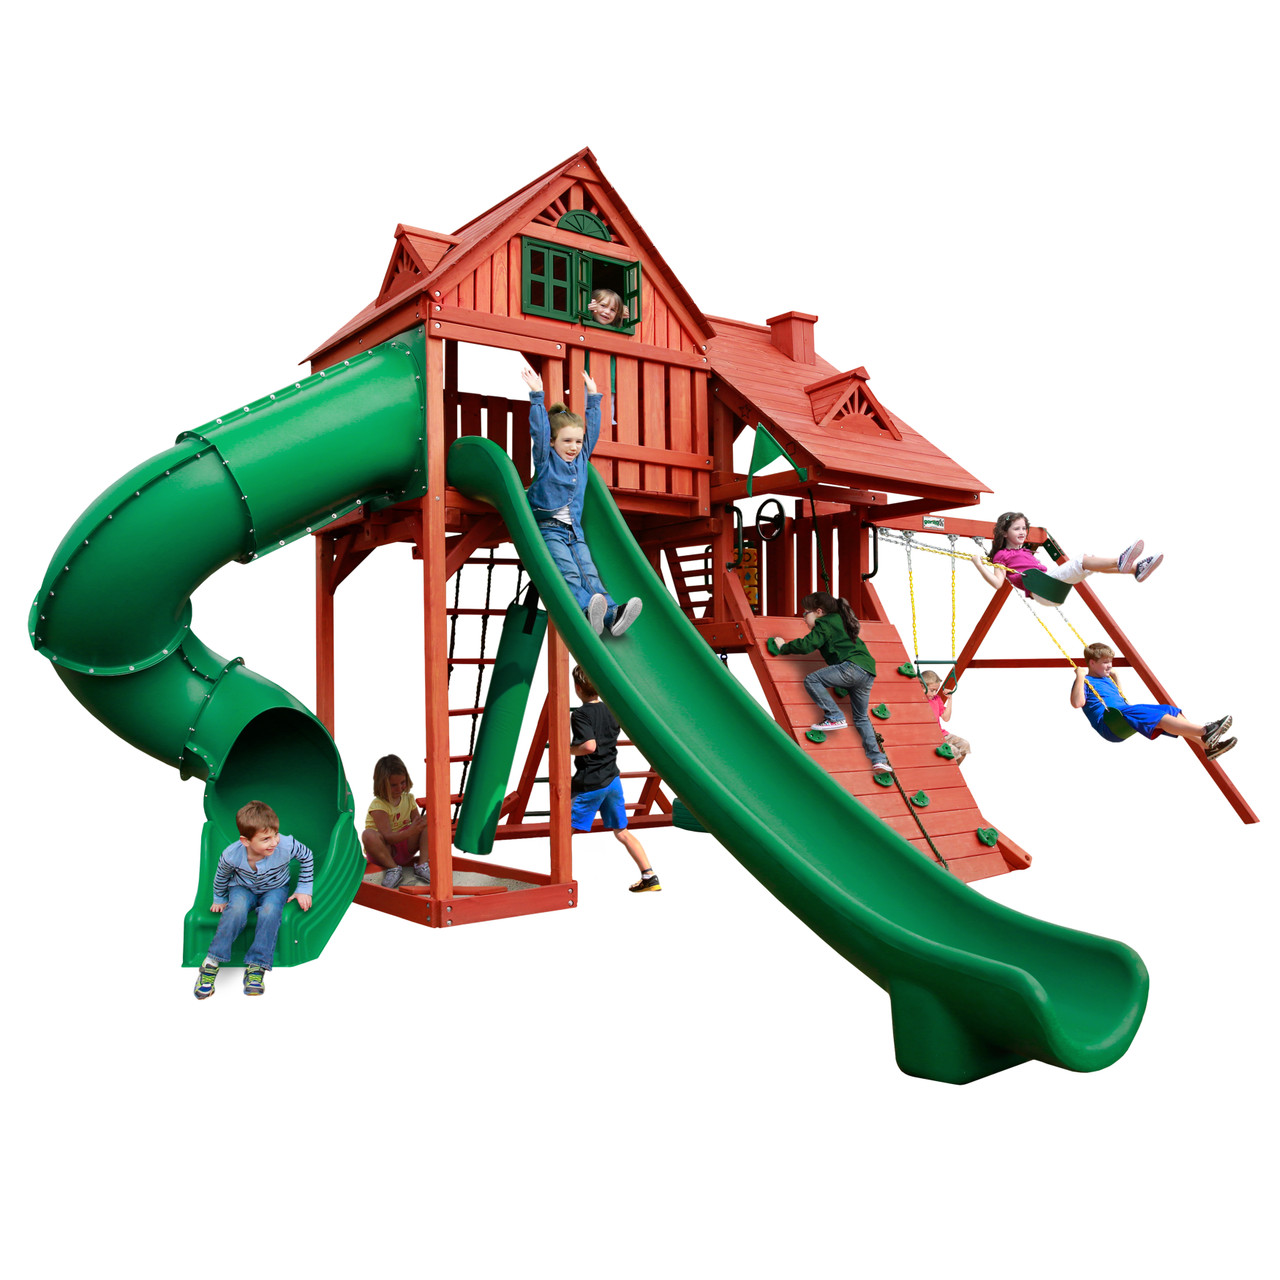 The Sun Palace Deluxe Cedar Wooden Swing Set with 2 Slides